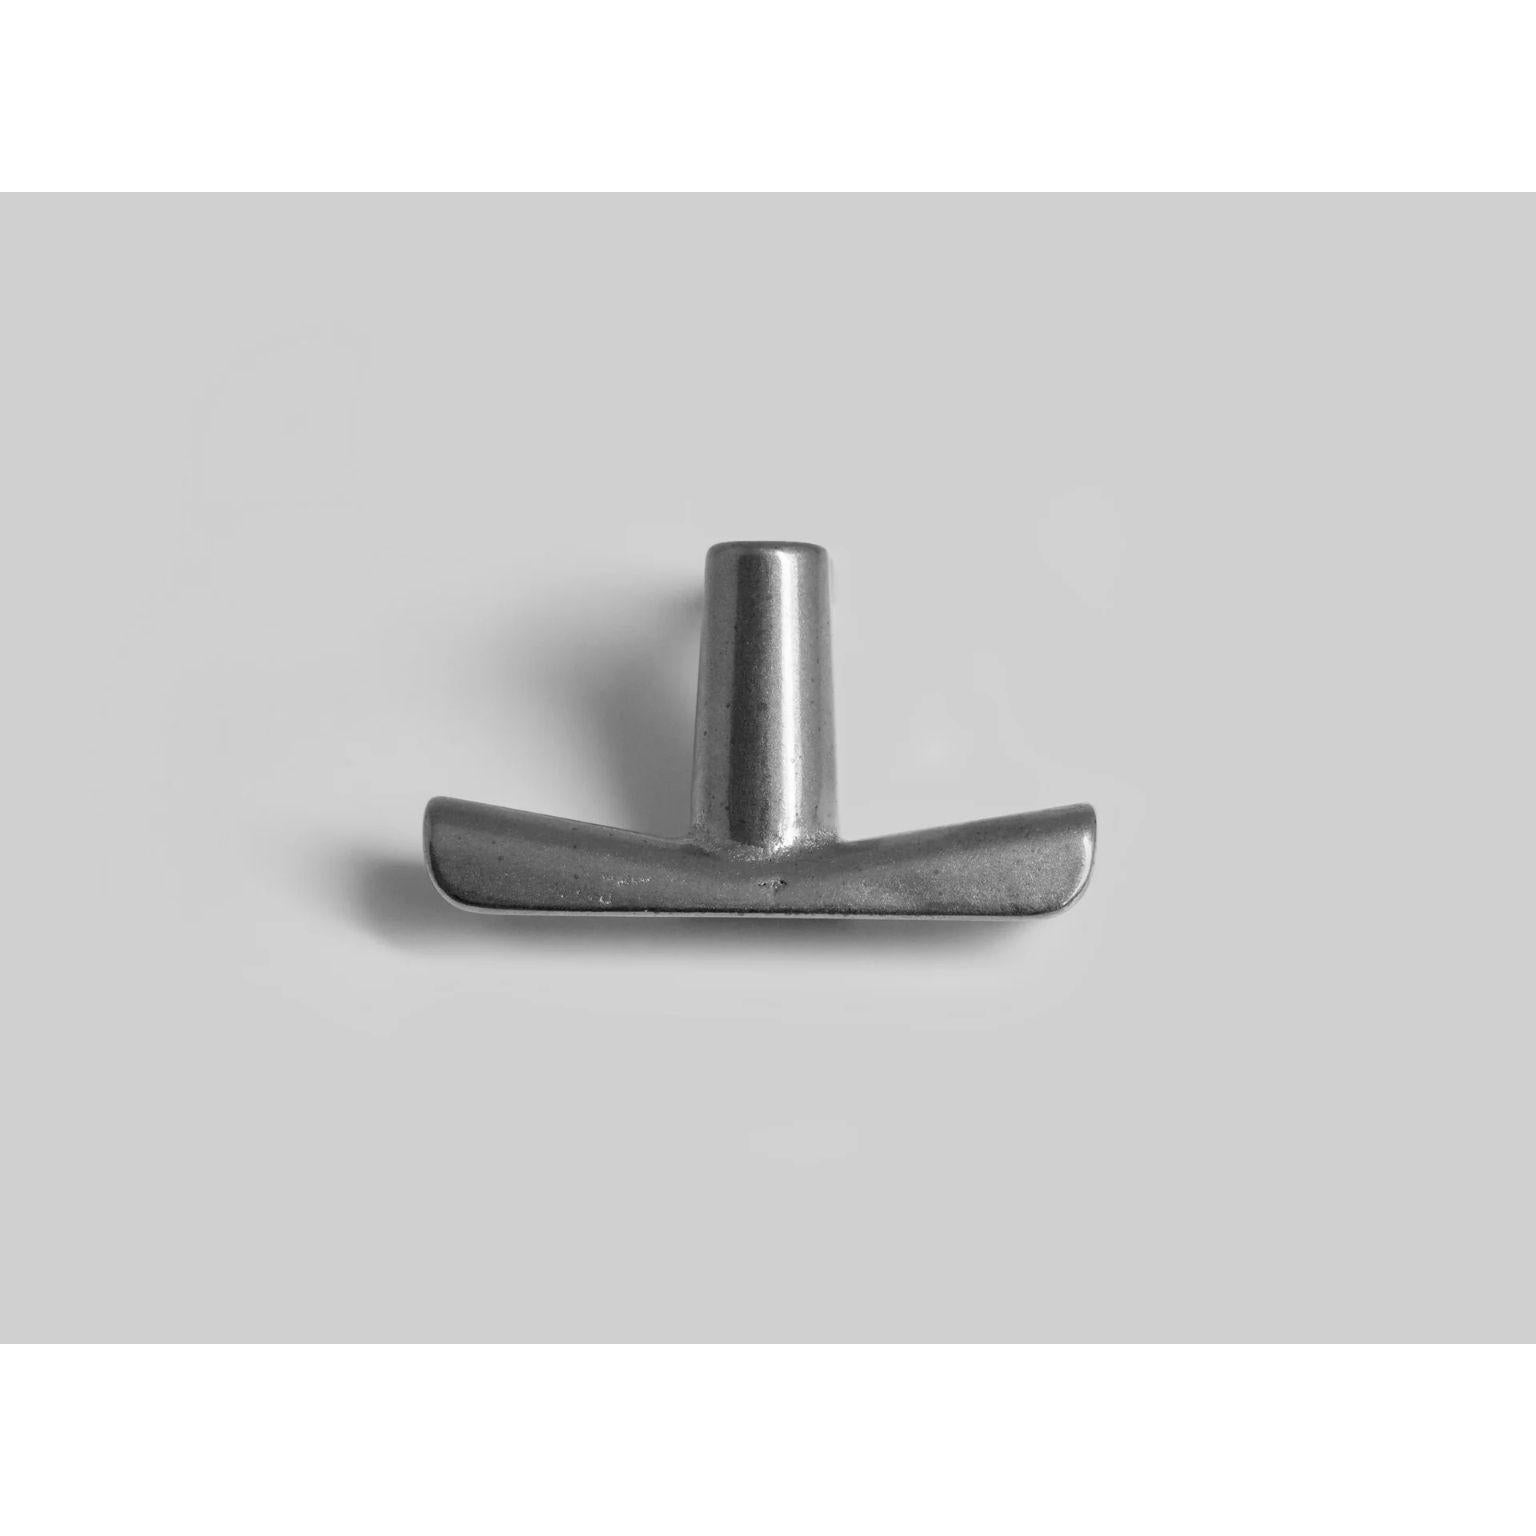 Aluminium Counter Hook by Henry Wilson
Dimensions: W 6 x D 4 x H 5 cm
Materials: Aluminium 

Designed for hanging bags and coats under bar counters. 
Each piece is sand cast in aluminium and rumble finished.
They are manufactured in small batches